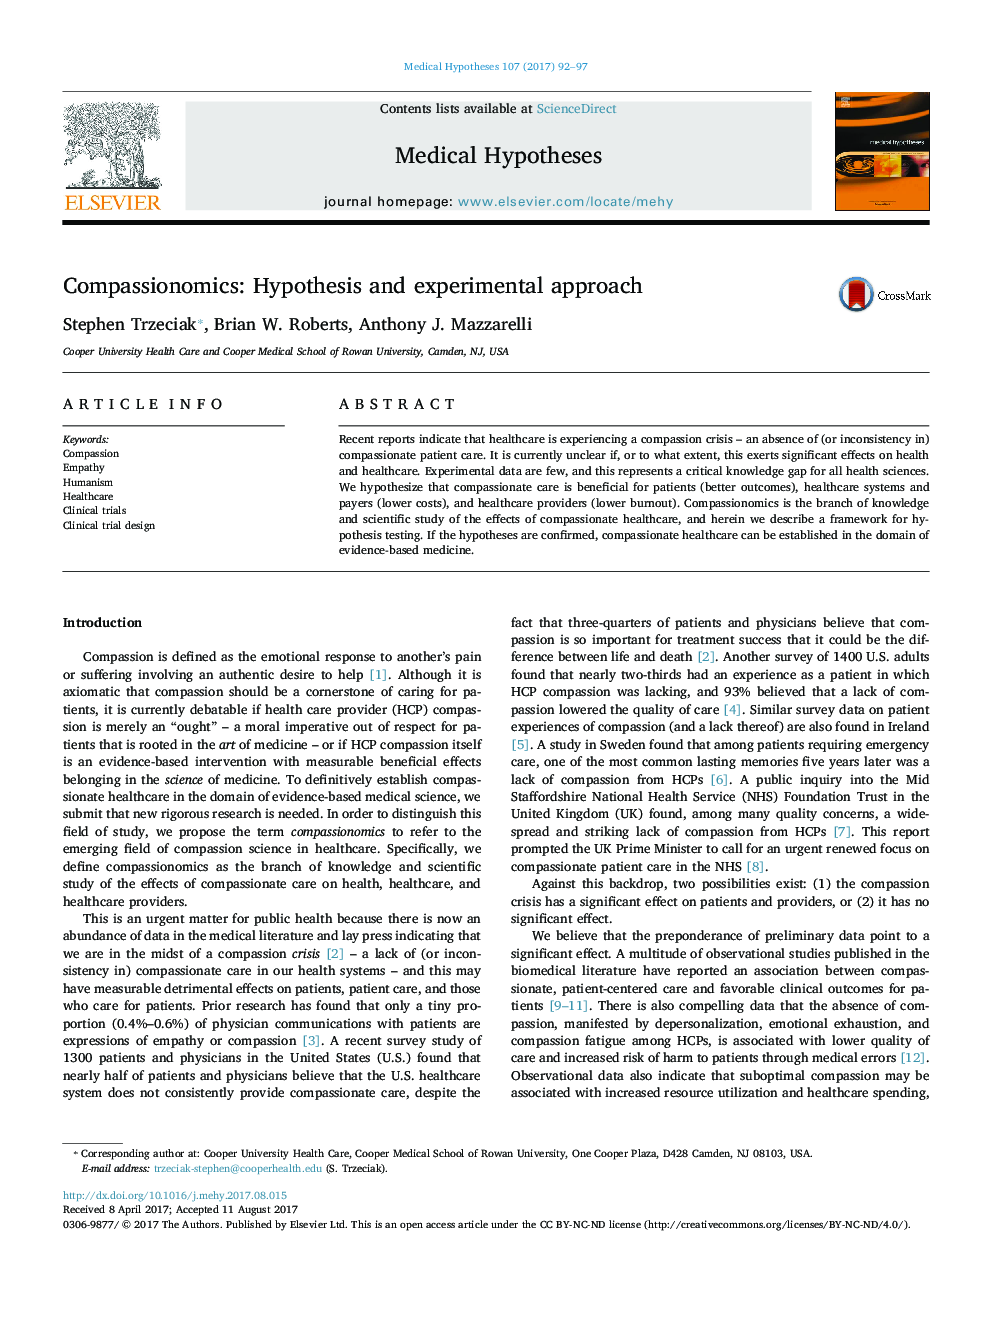 Compassionomics: Hypothesis and experimental approach